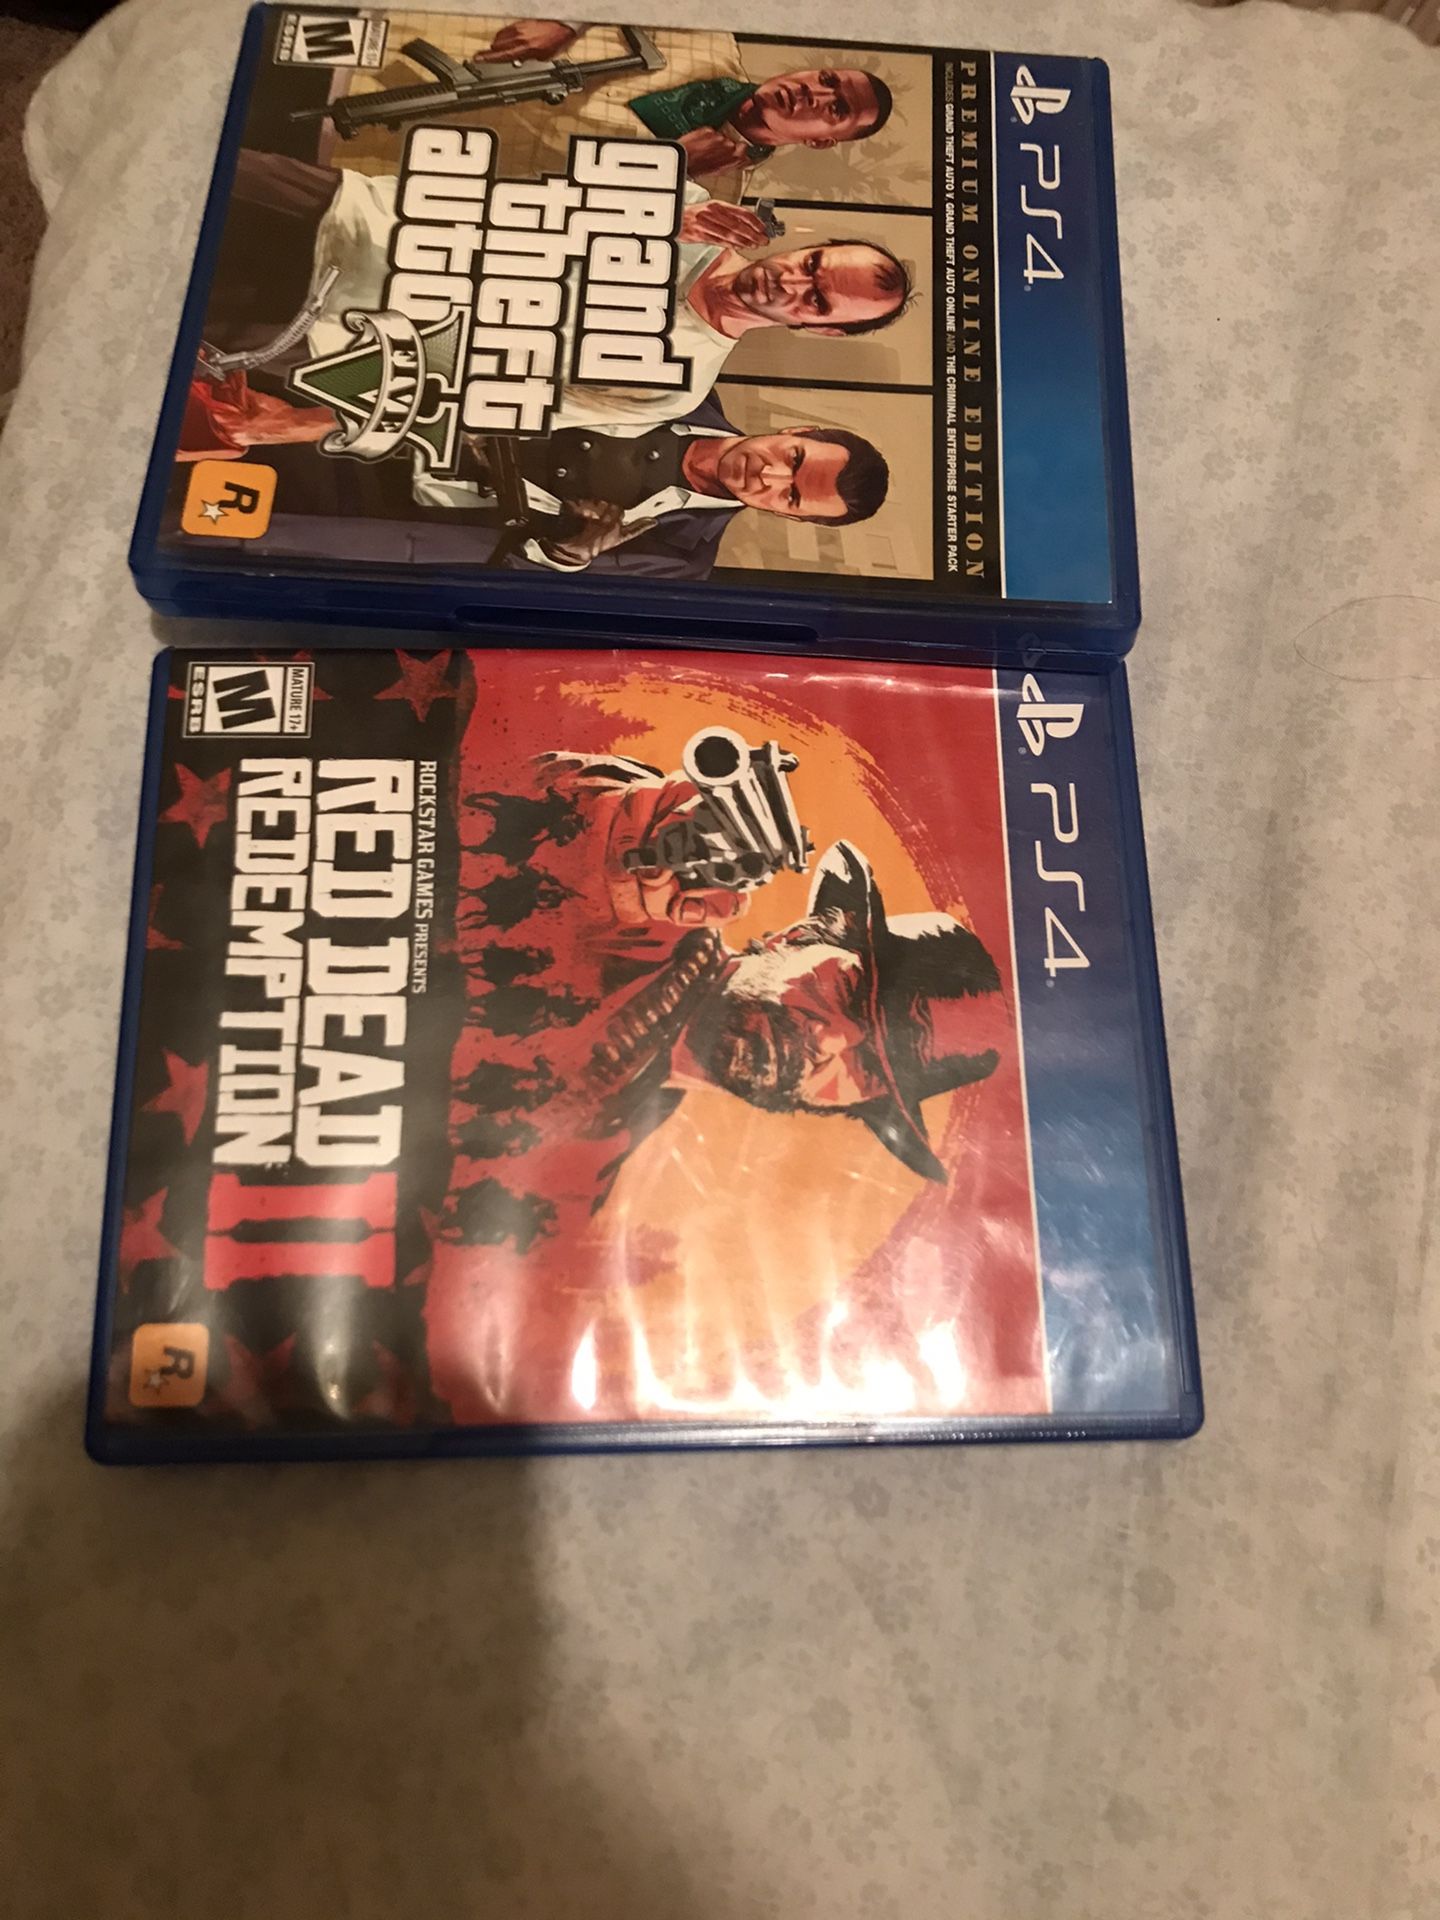 GTA & red dead redemption